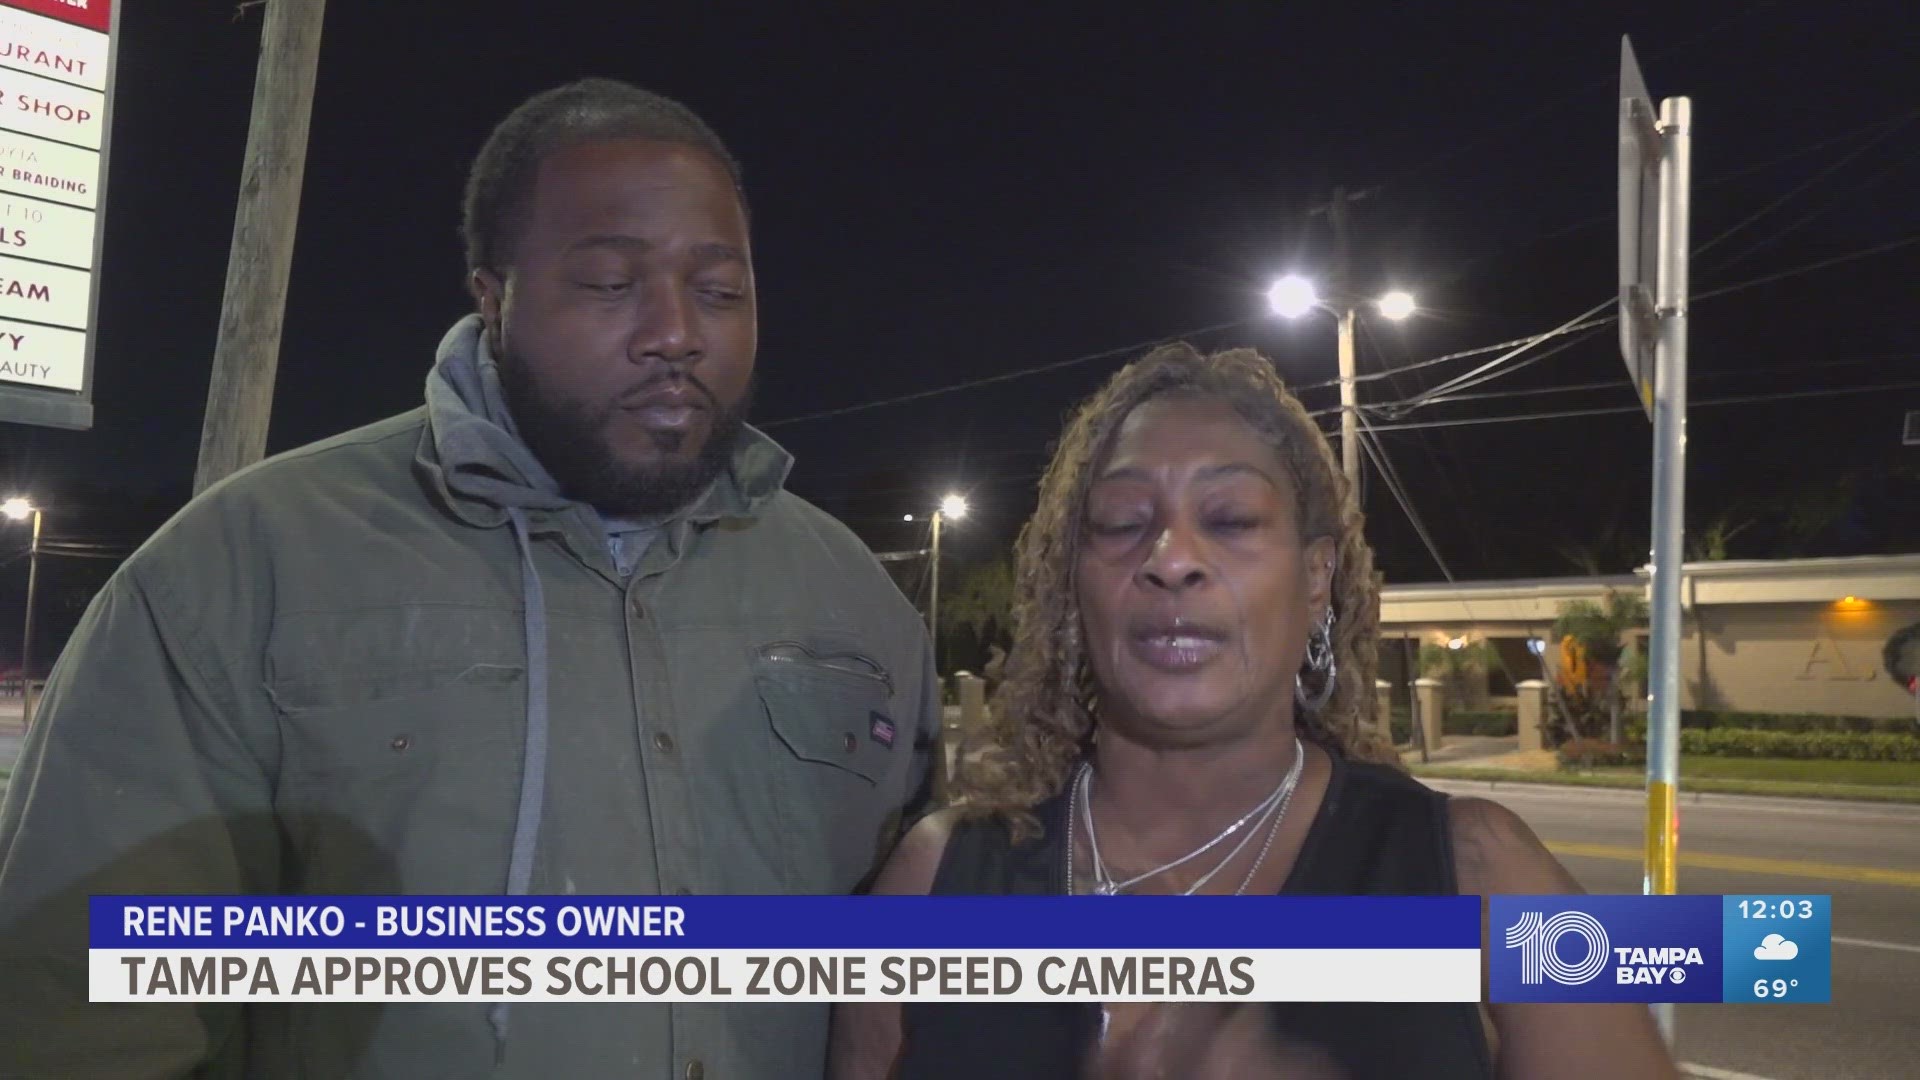 The cameras will go up in 13 school zones with a heightened risk of speeding drivers.